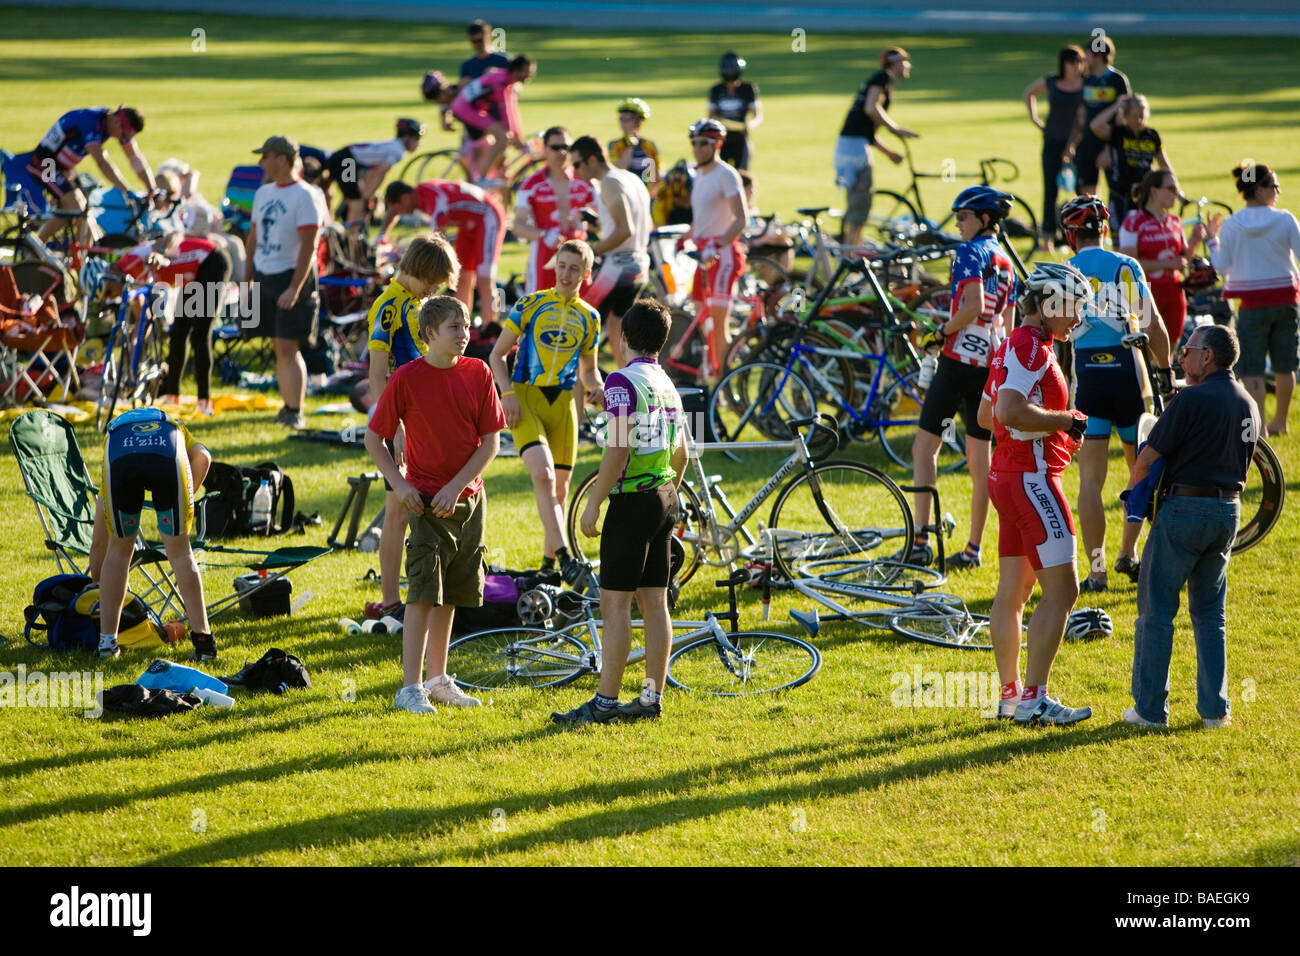 ILLINOIS Northbrook Riders prepare for bicycle race in infield of velodrome track Stock Photo